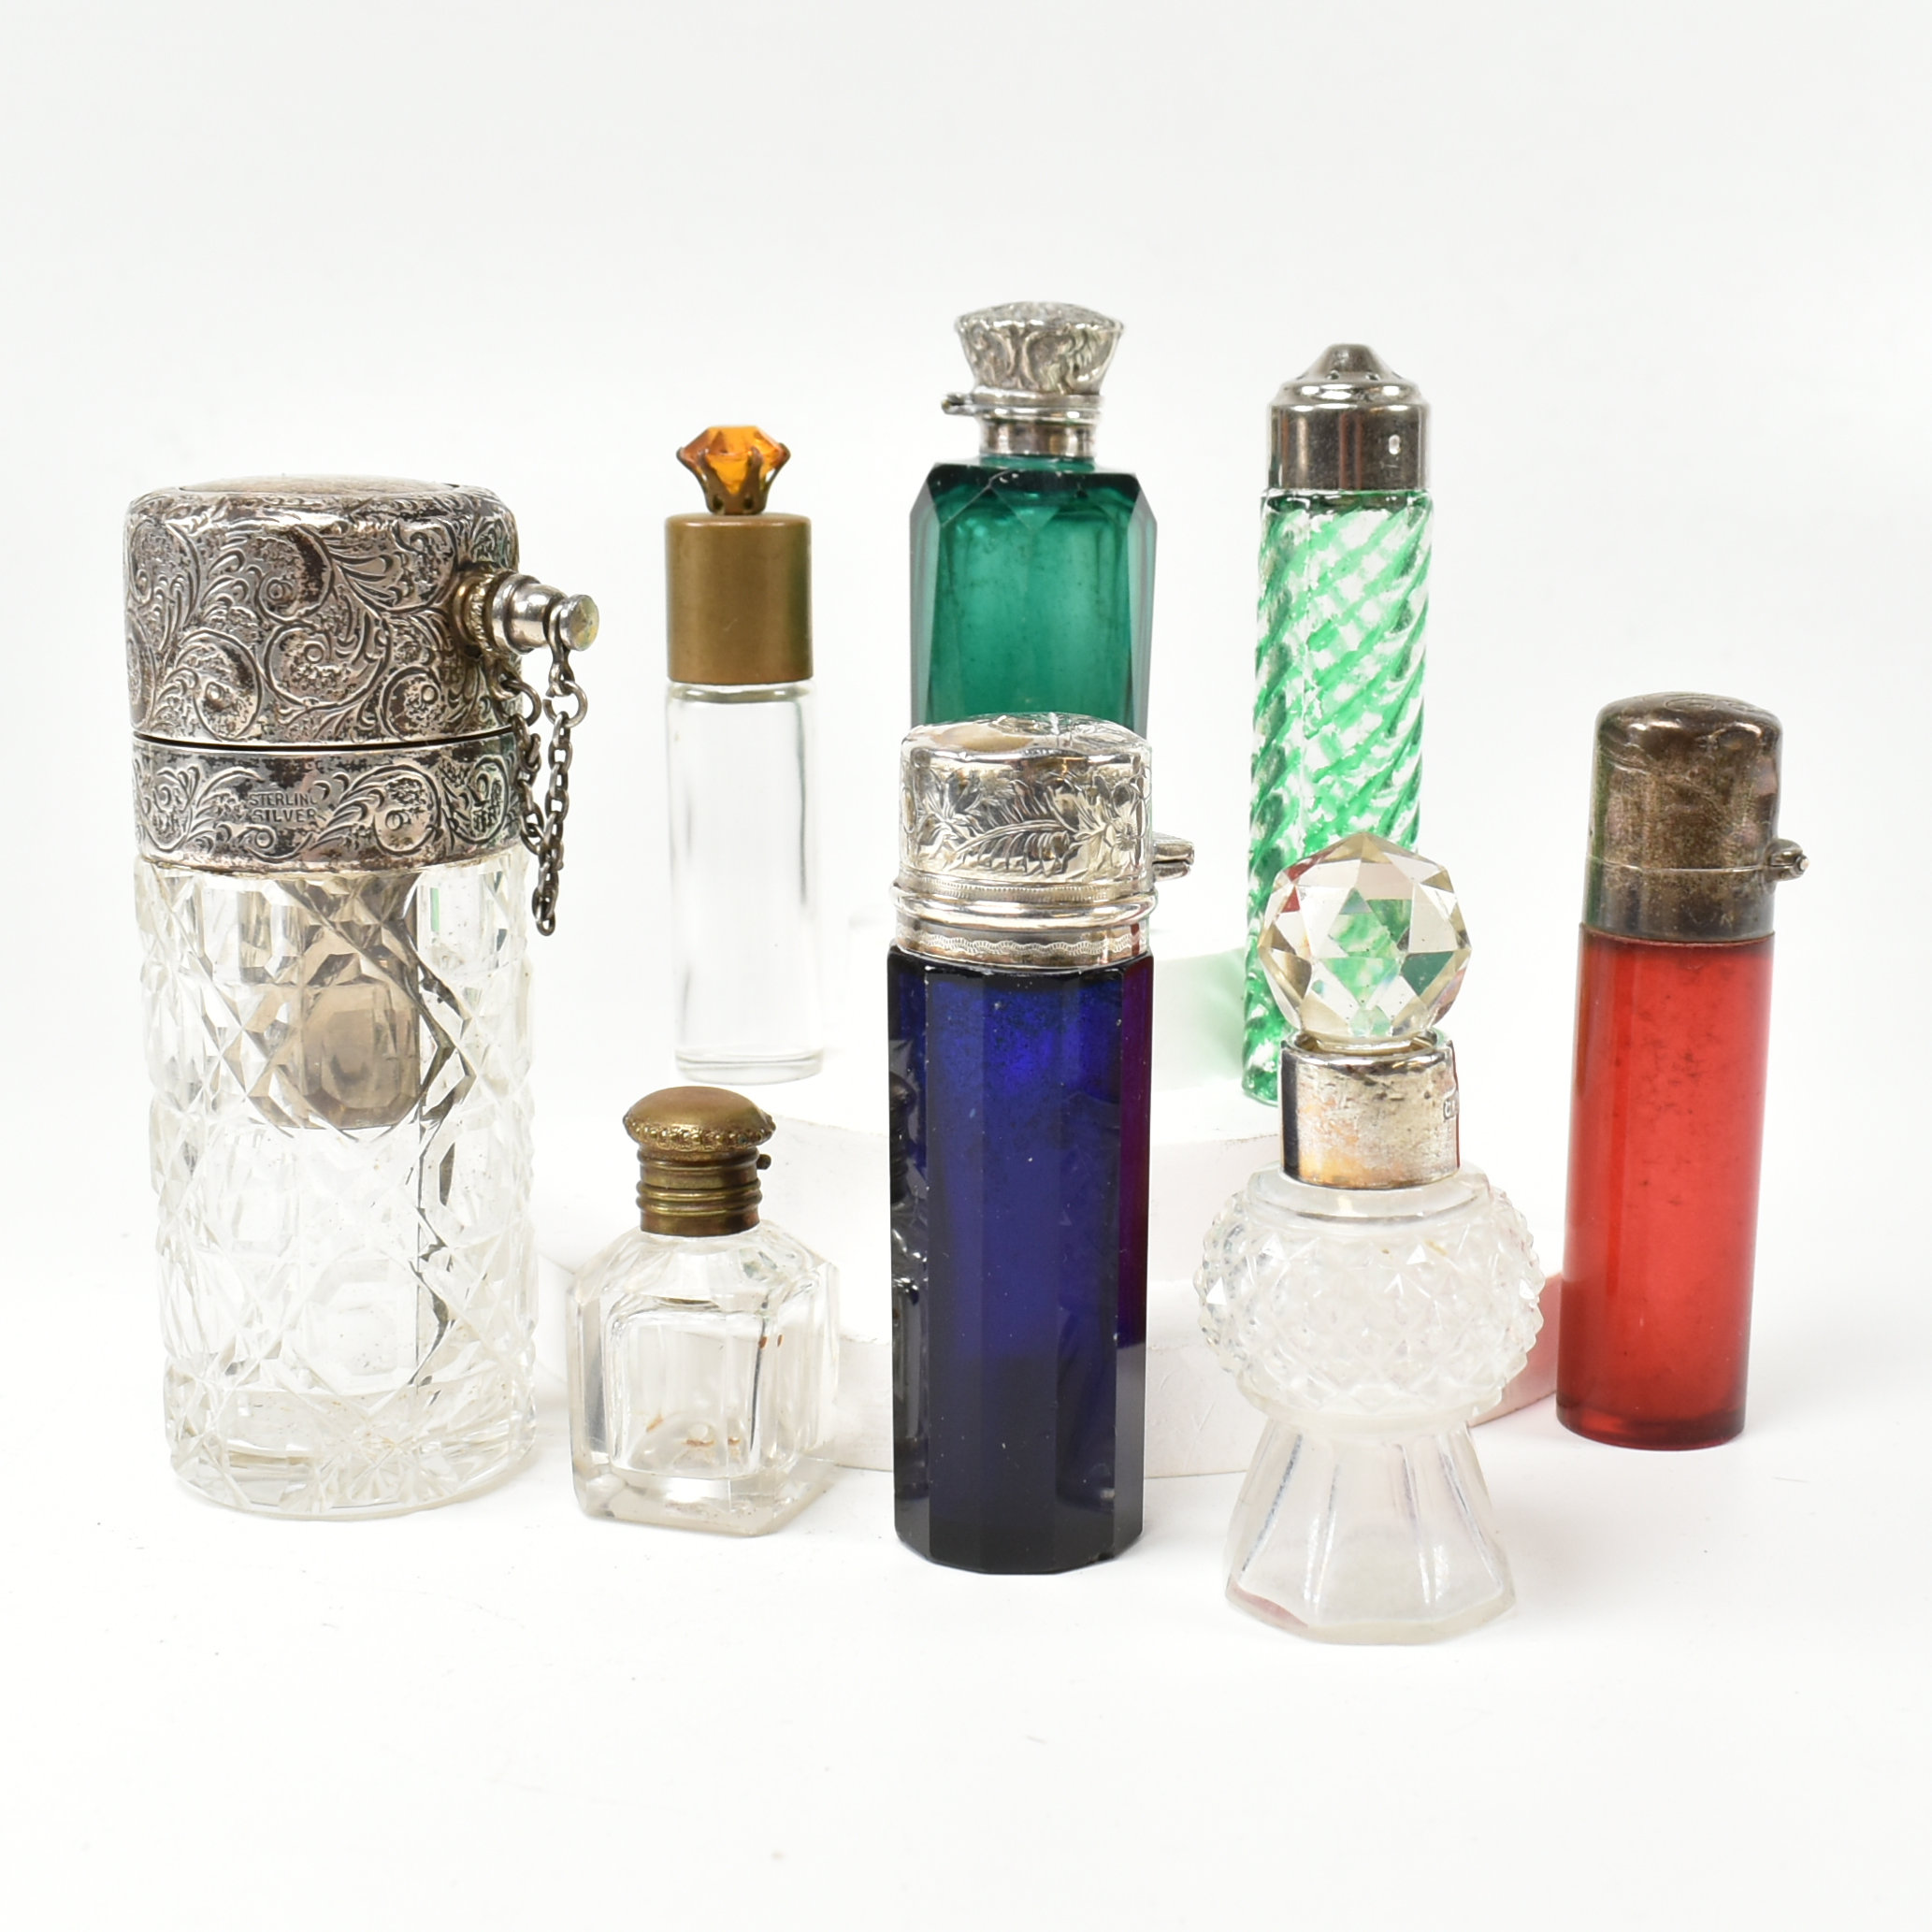 ANTIQUE & LATER CUT GLASS SCENT BOTTLES INCLUDING SILVER MOUNTED - Image 2 of 10